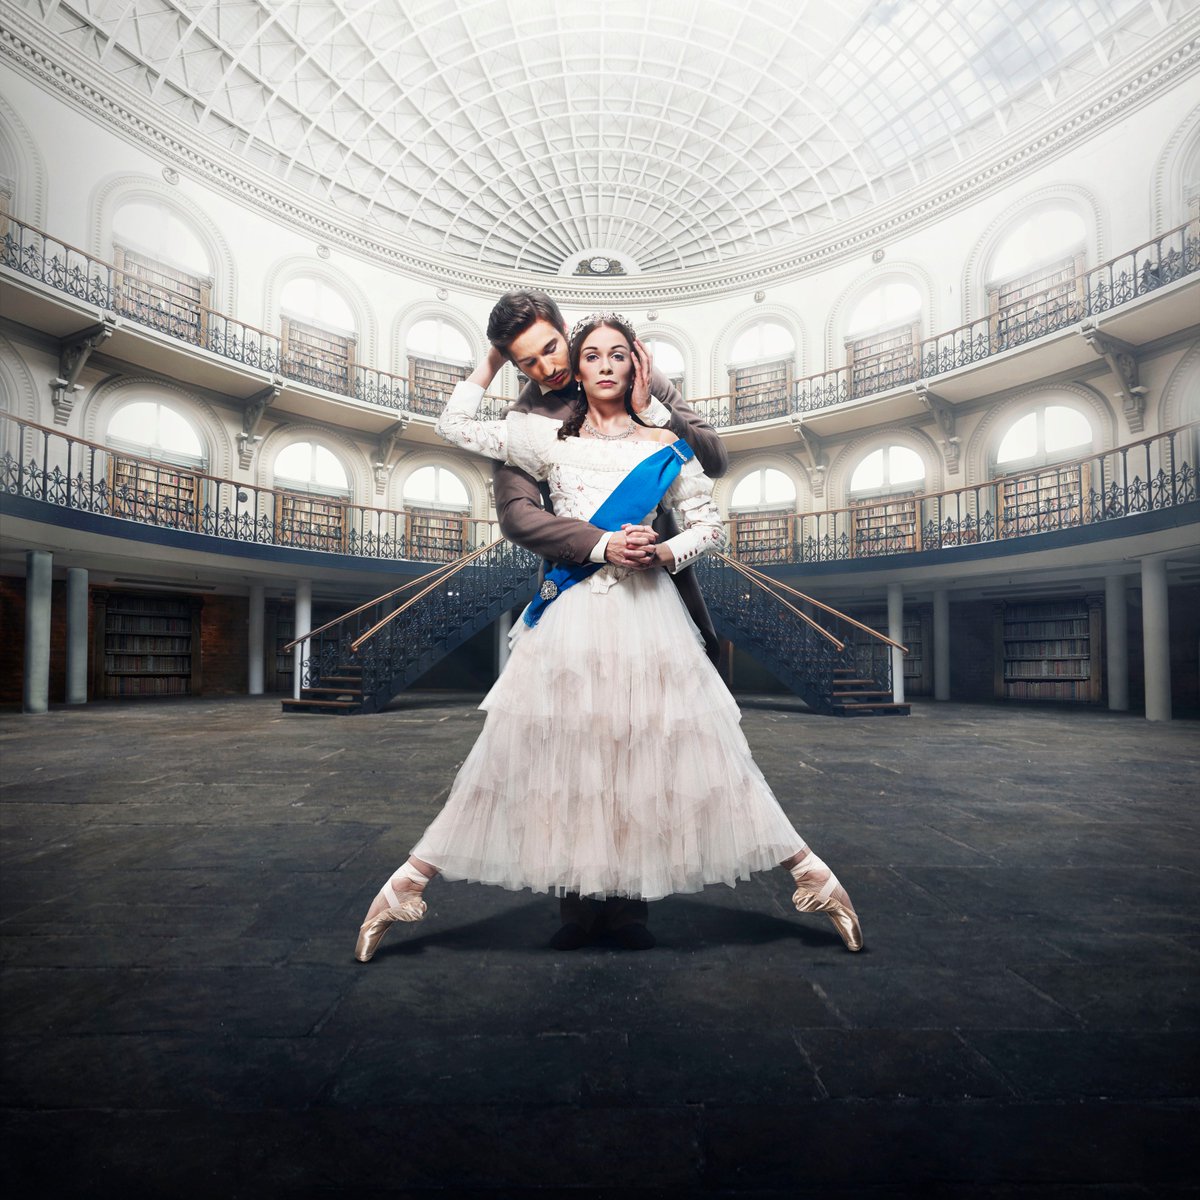 @northernballet @CathyRMarston's genius #Victoria @MKTheatre starring one of my fave soloists #Abigailprudames - rising star @MlindiKulashe MK Boy @balletbates - such joy, passion, sadness & History! Here's my review facebook.com/saved/?cref=53 @Secklow1055fm #ballet #dance #history